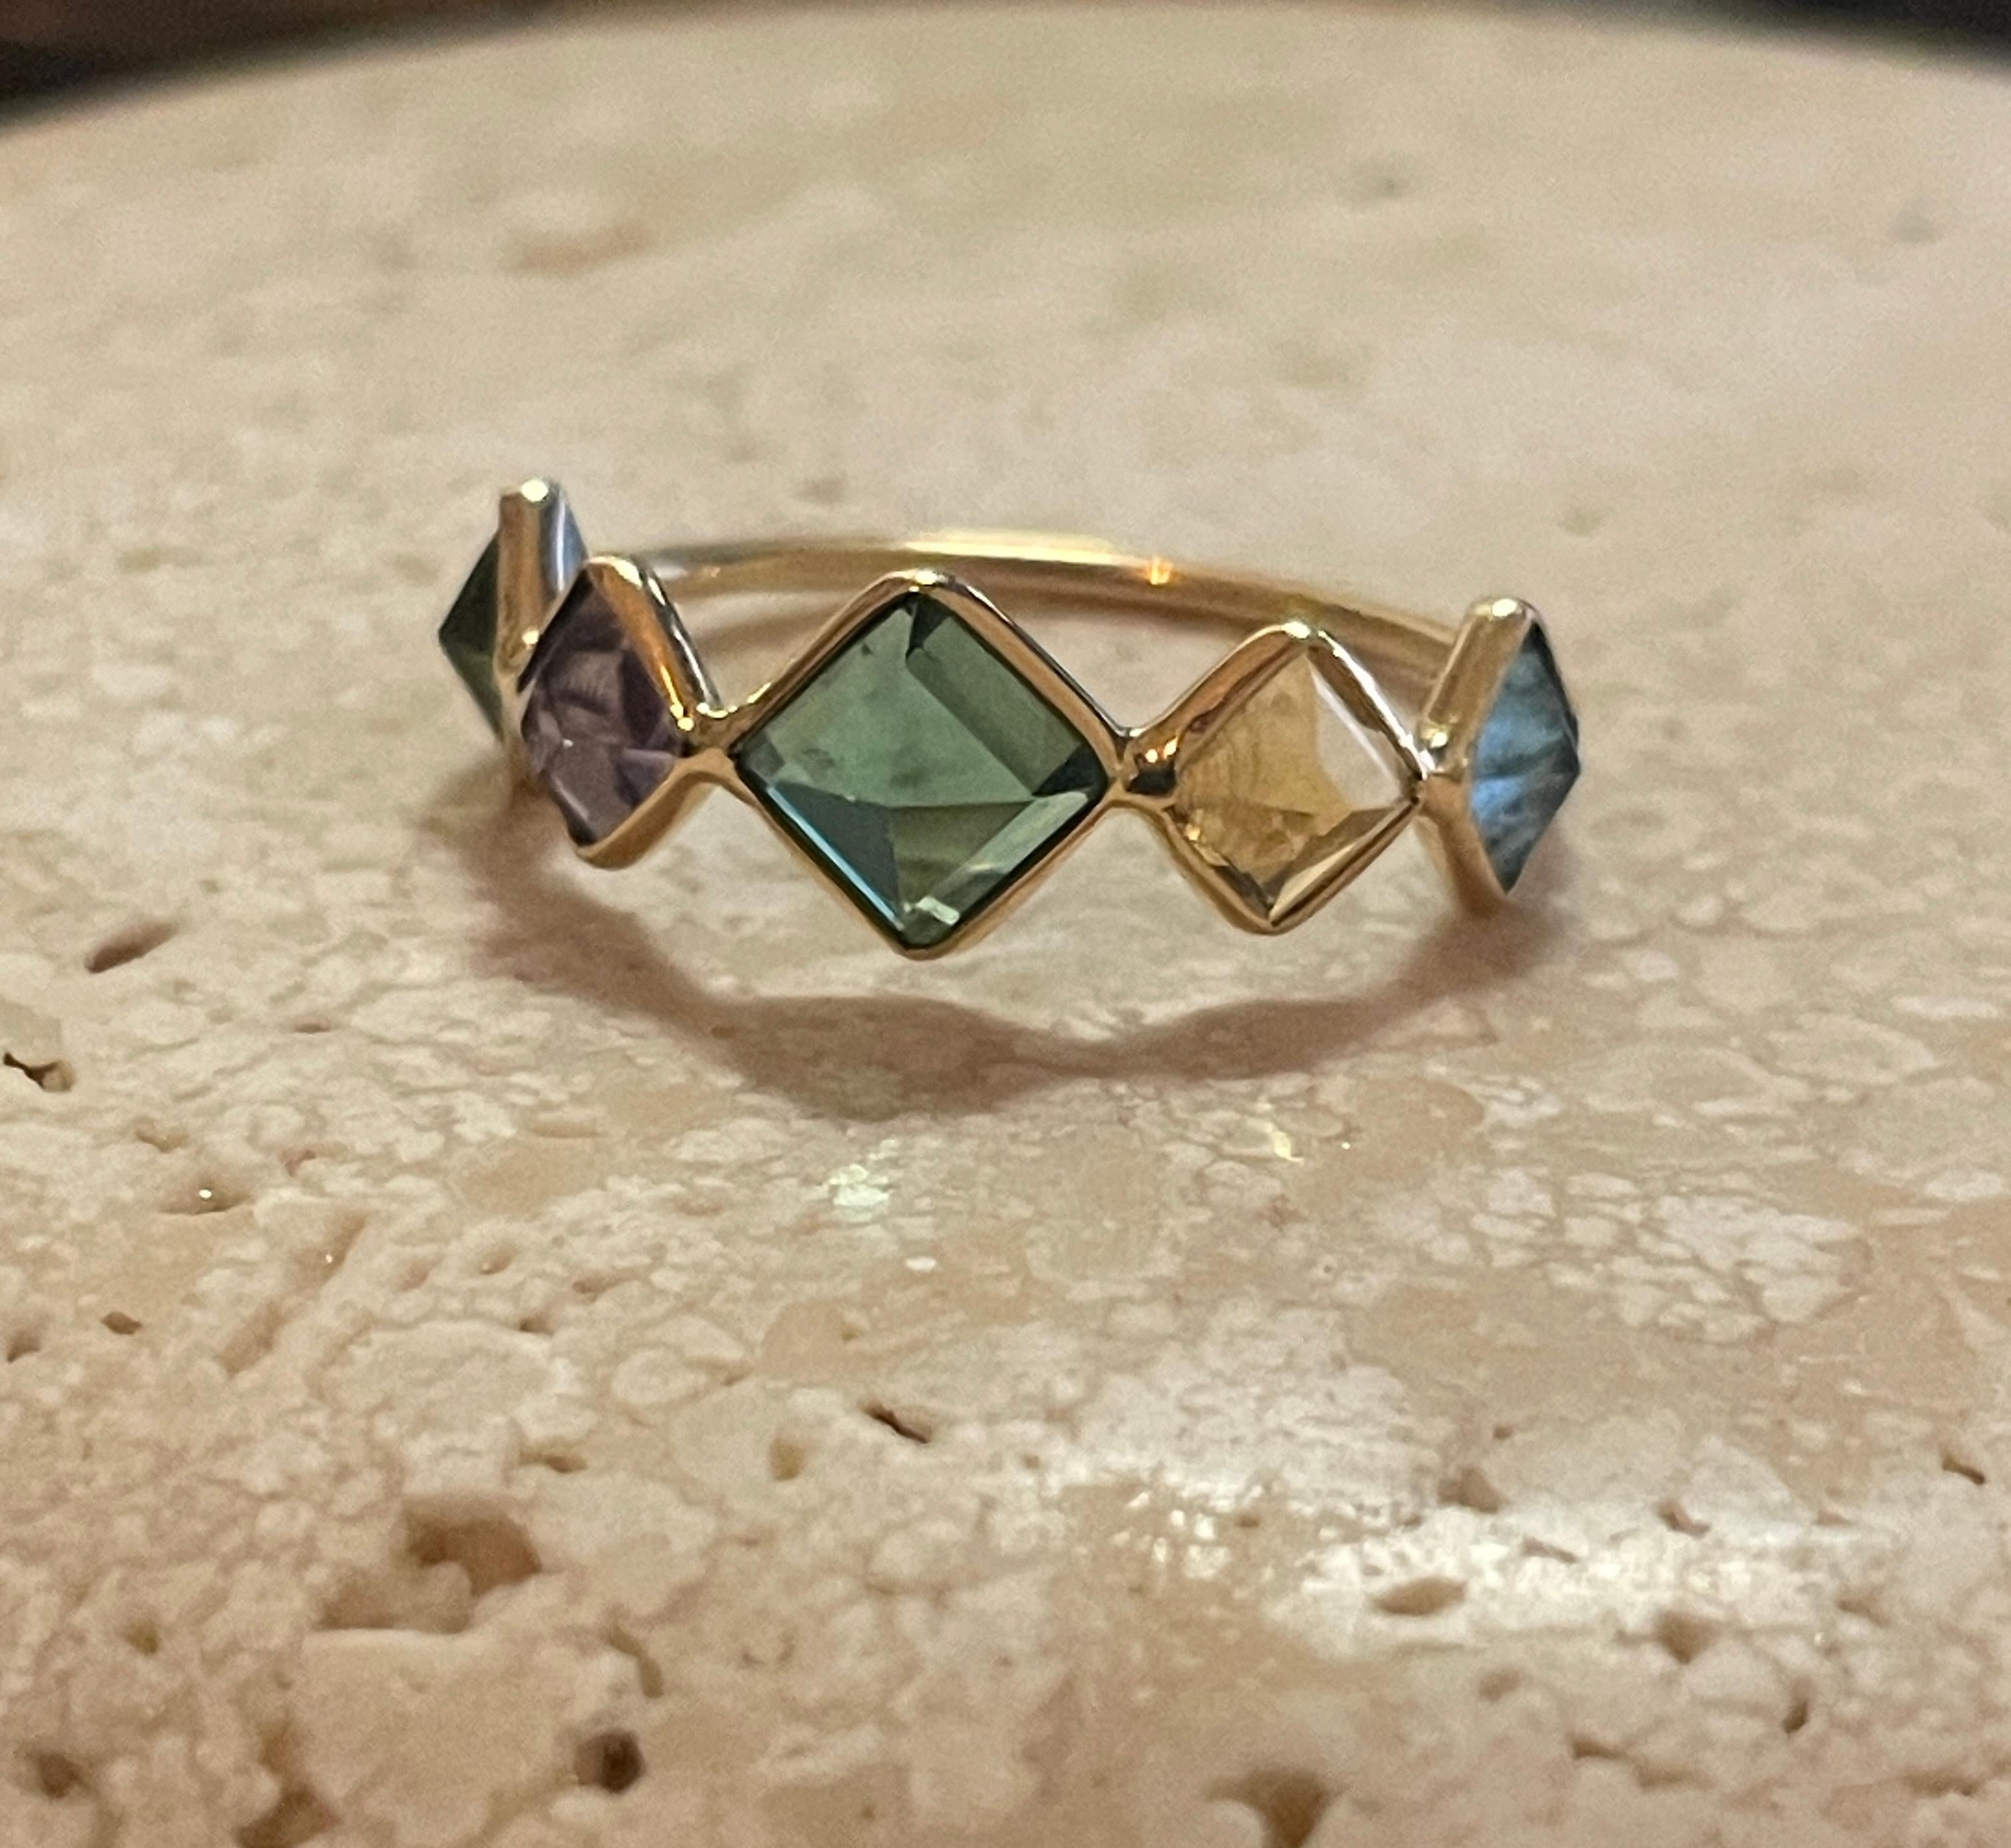 This beautiful and unique ring is comprised of 5 gemstones including Green Tourmaline, Yellow Tourmaline, Amethyst & Aquamarine. These gemstones are emerald cut and bezel set upside down in 18K gold. The upside down setting in a diamond shape makes